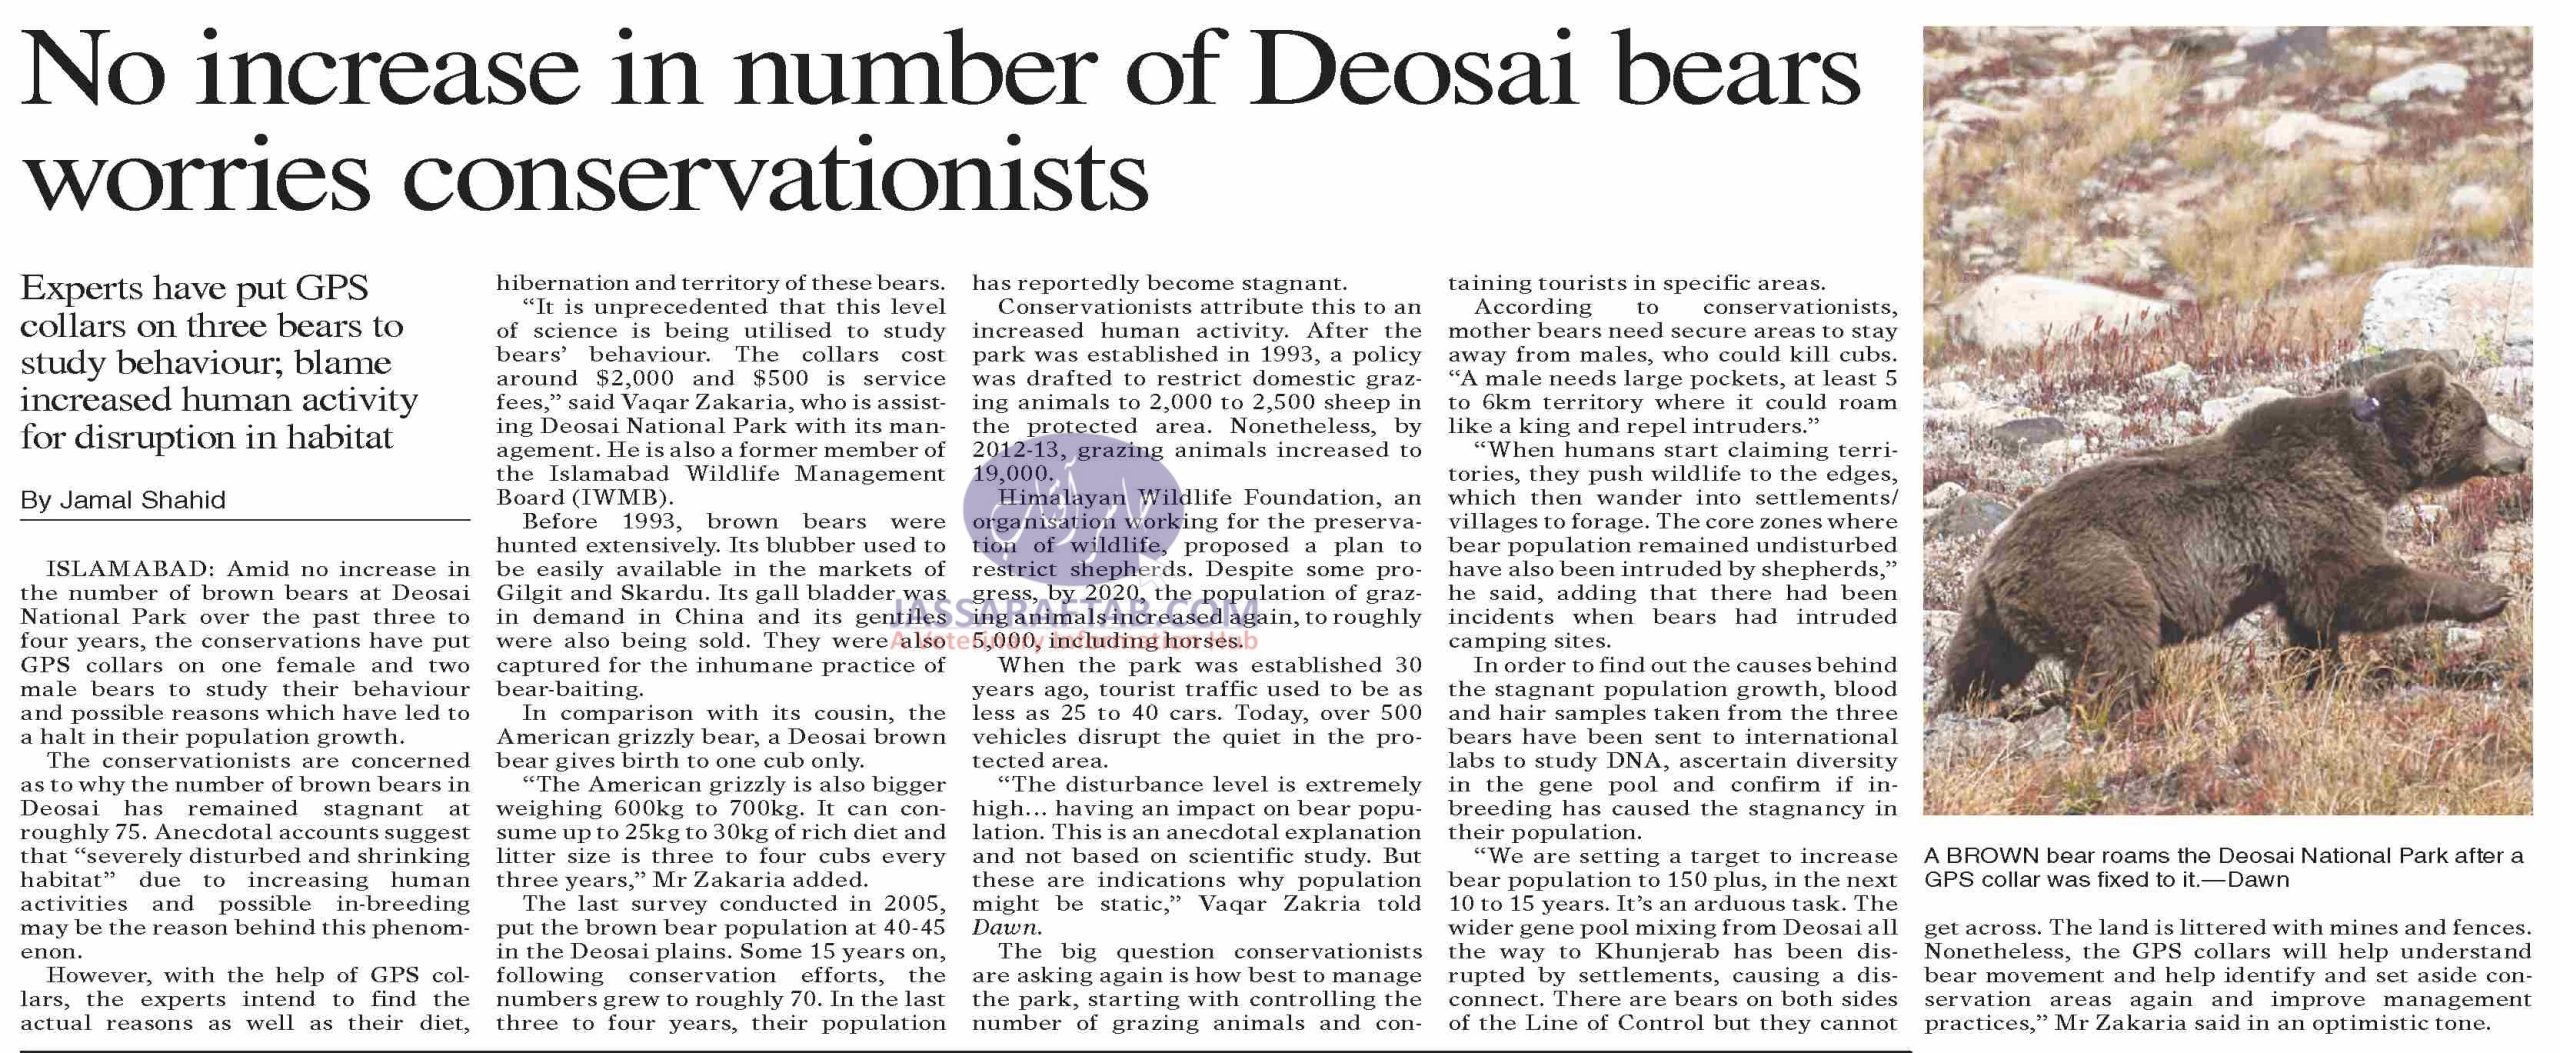 No increase in brown bear population at Deosai National Park